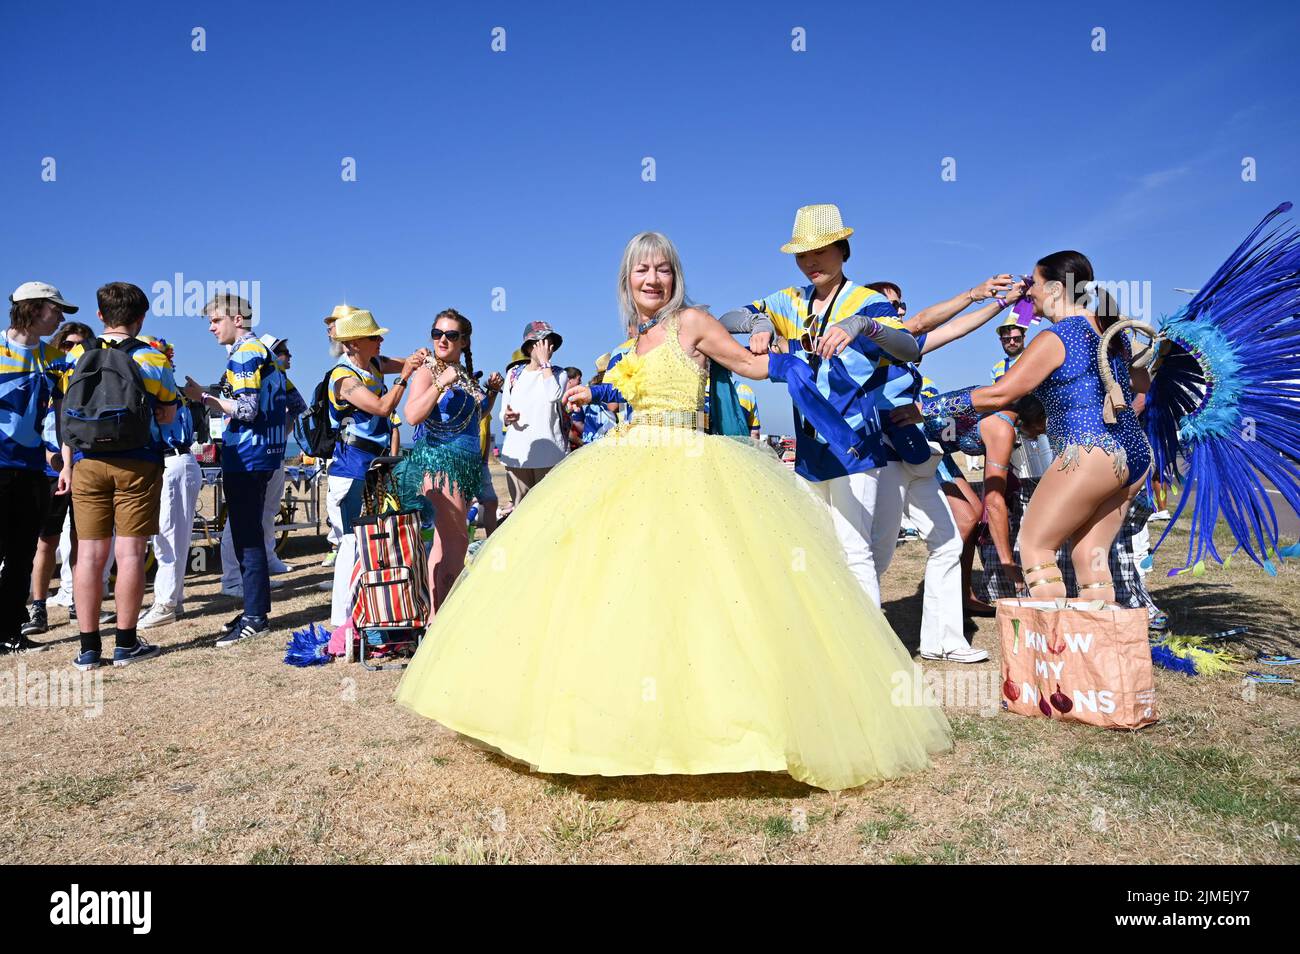 Brighton UK 6th August 2022 - Early arrivals get their costumes ready for Brighton and Hove Pride Parade on a beautiful hot sunny day. With good weather forecast large crowds are expected to attend the UK's biggest LGBTQ Pride festival in Brighton over the weekend : Credit Simon Dack / Alamy Live News Stock Photo